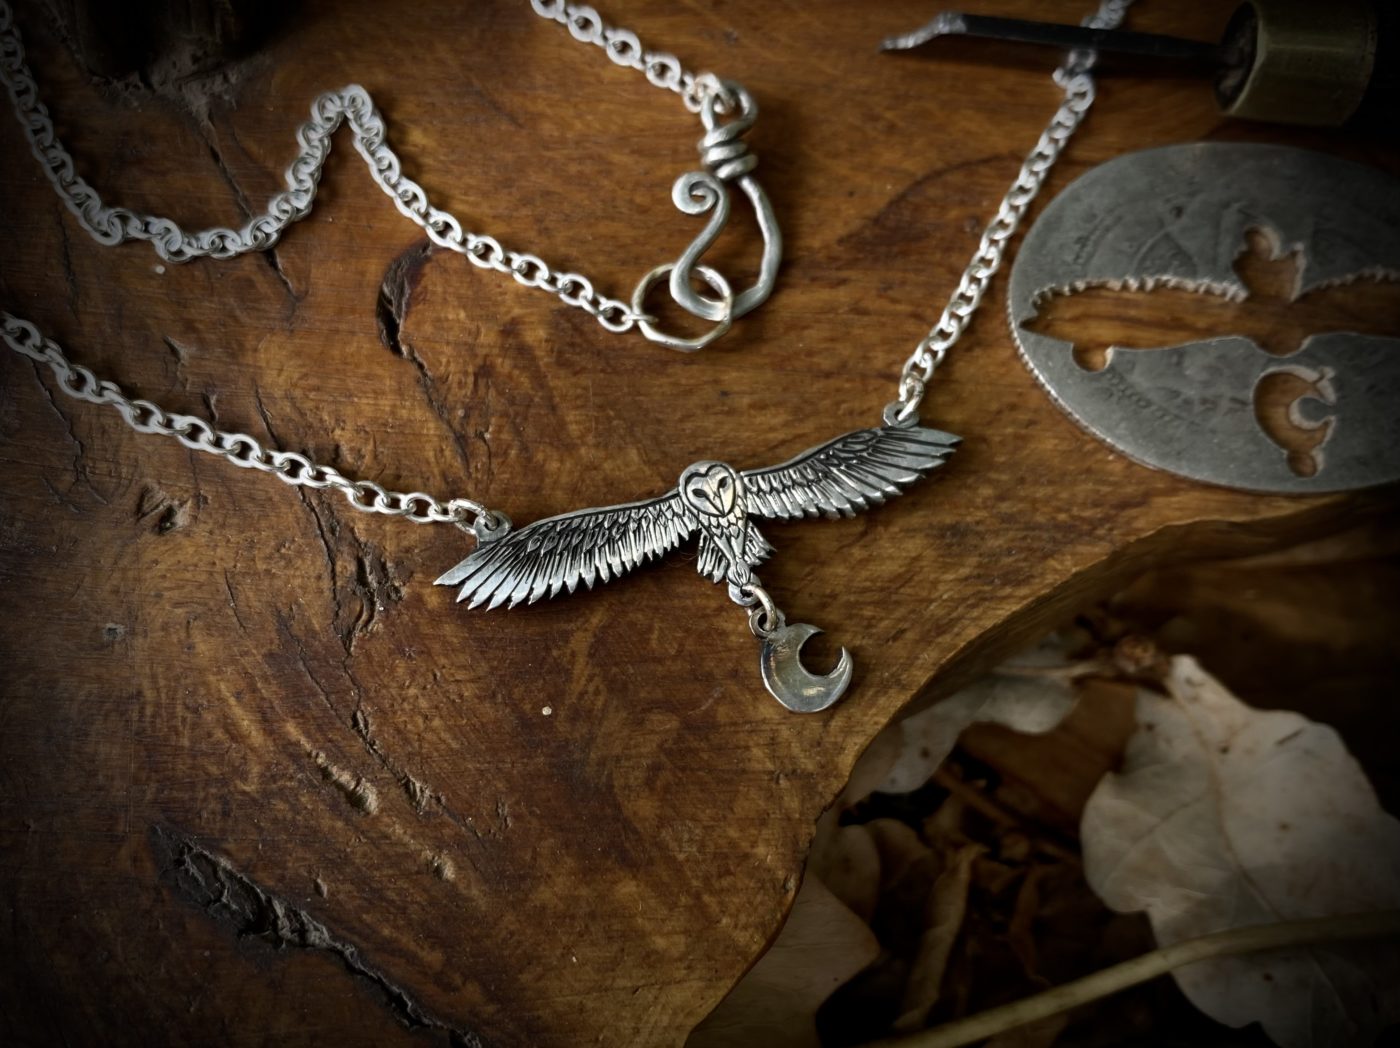 Gillihowlet flying barn owl necklace handmade from sterling silver upcycled from pre 1920 silver coins of the British realm